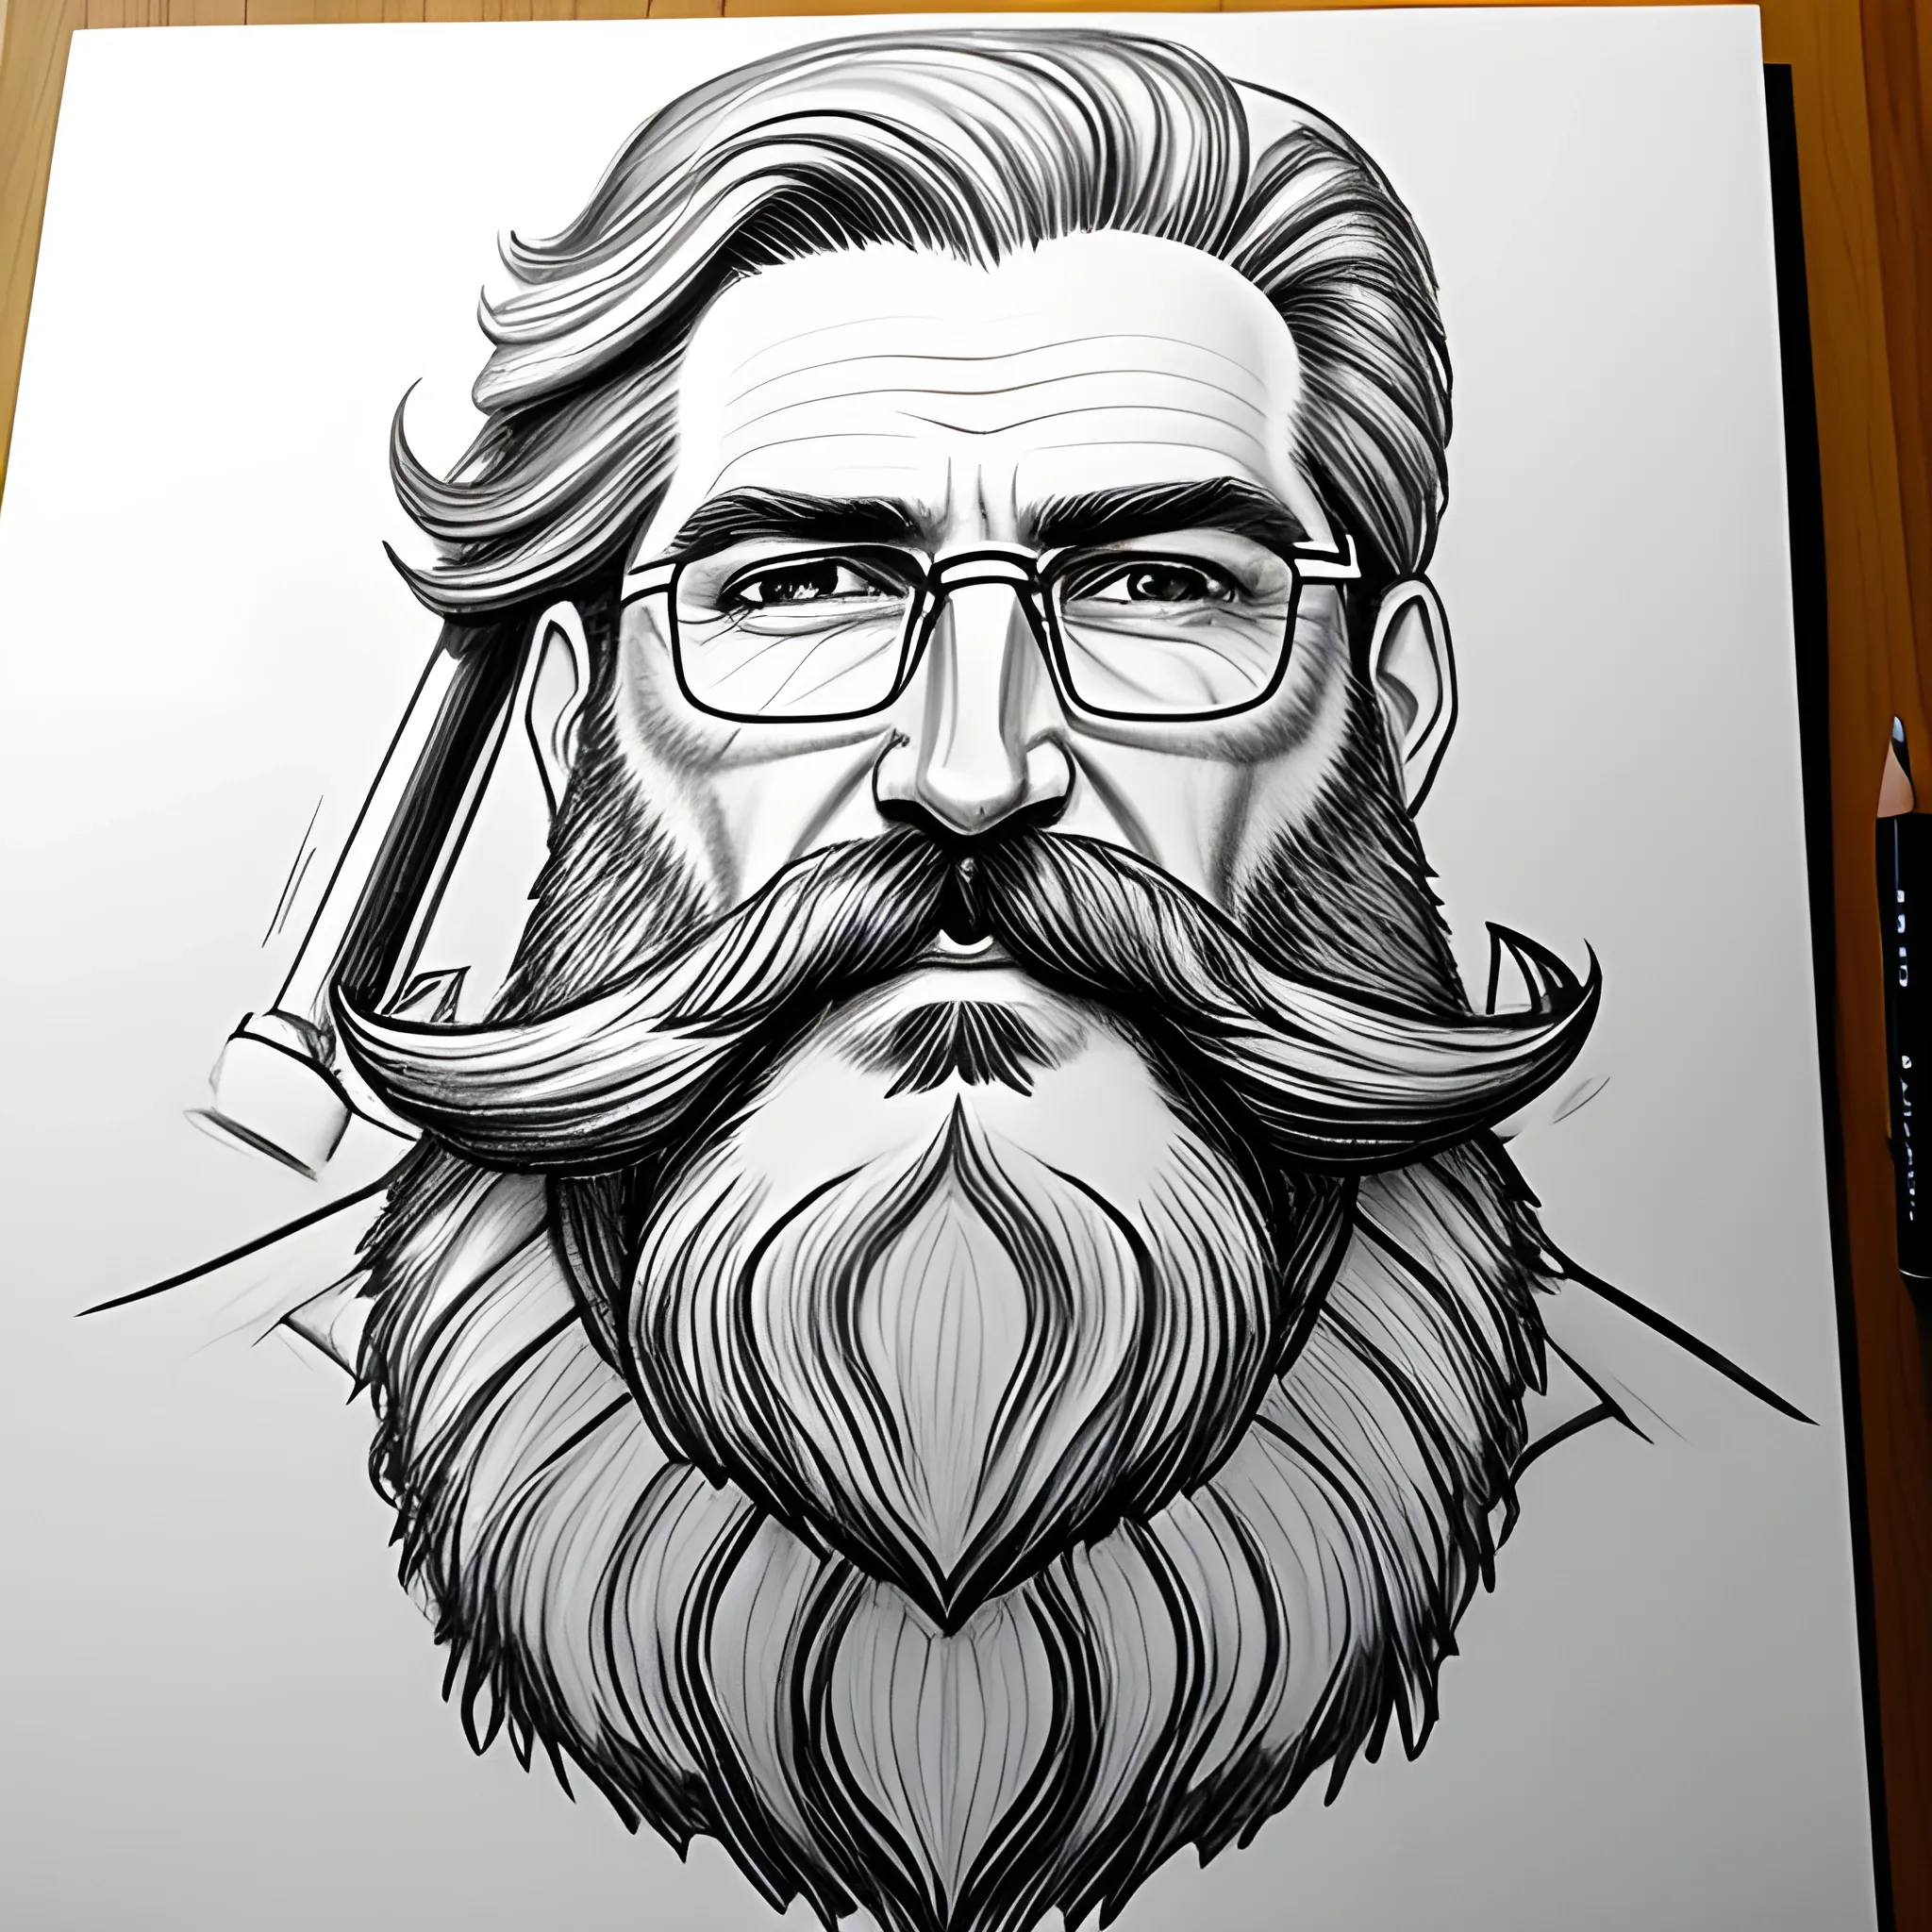 88214 Bearded Man Draw Images Stock Photos  Vectors  Shutterstock